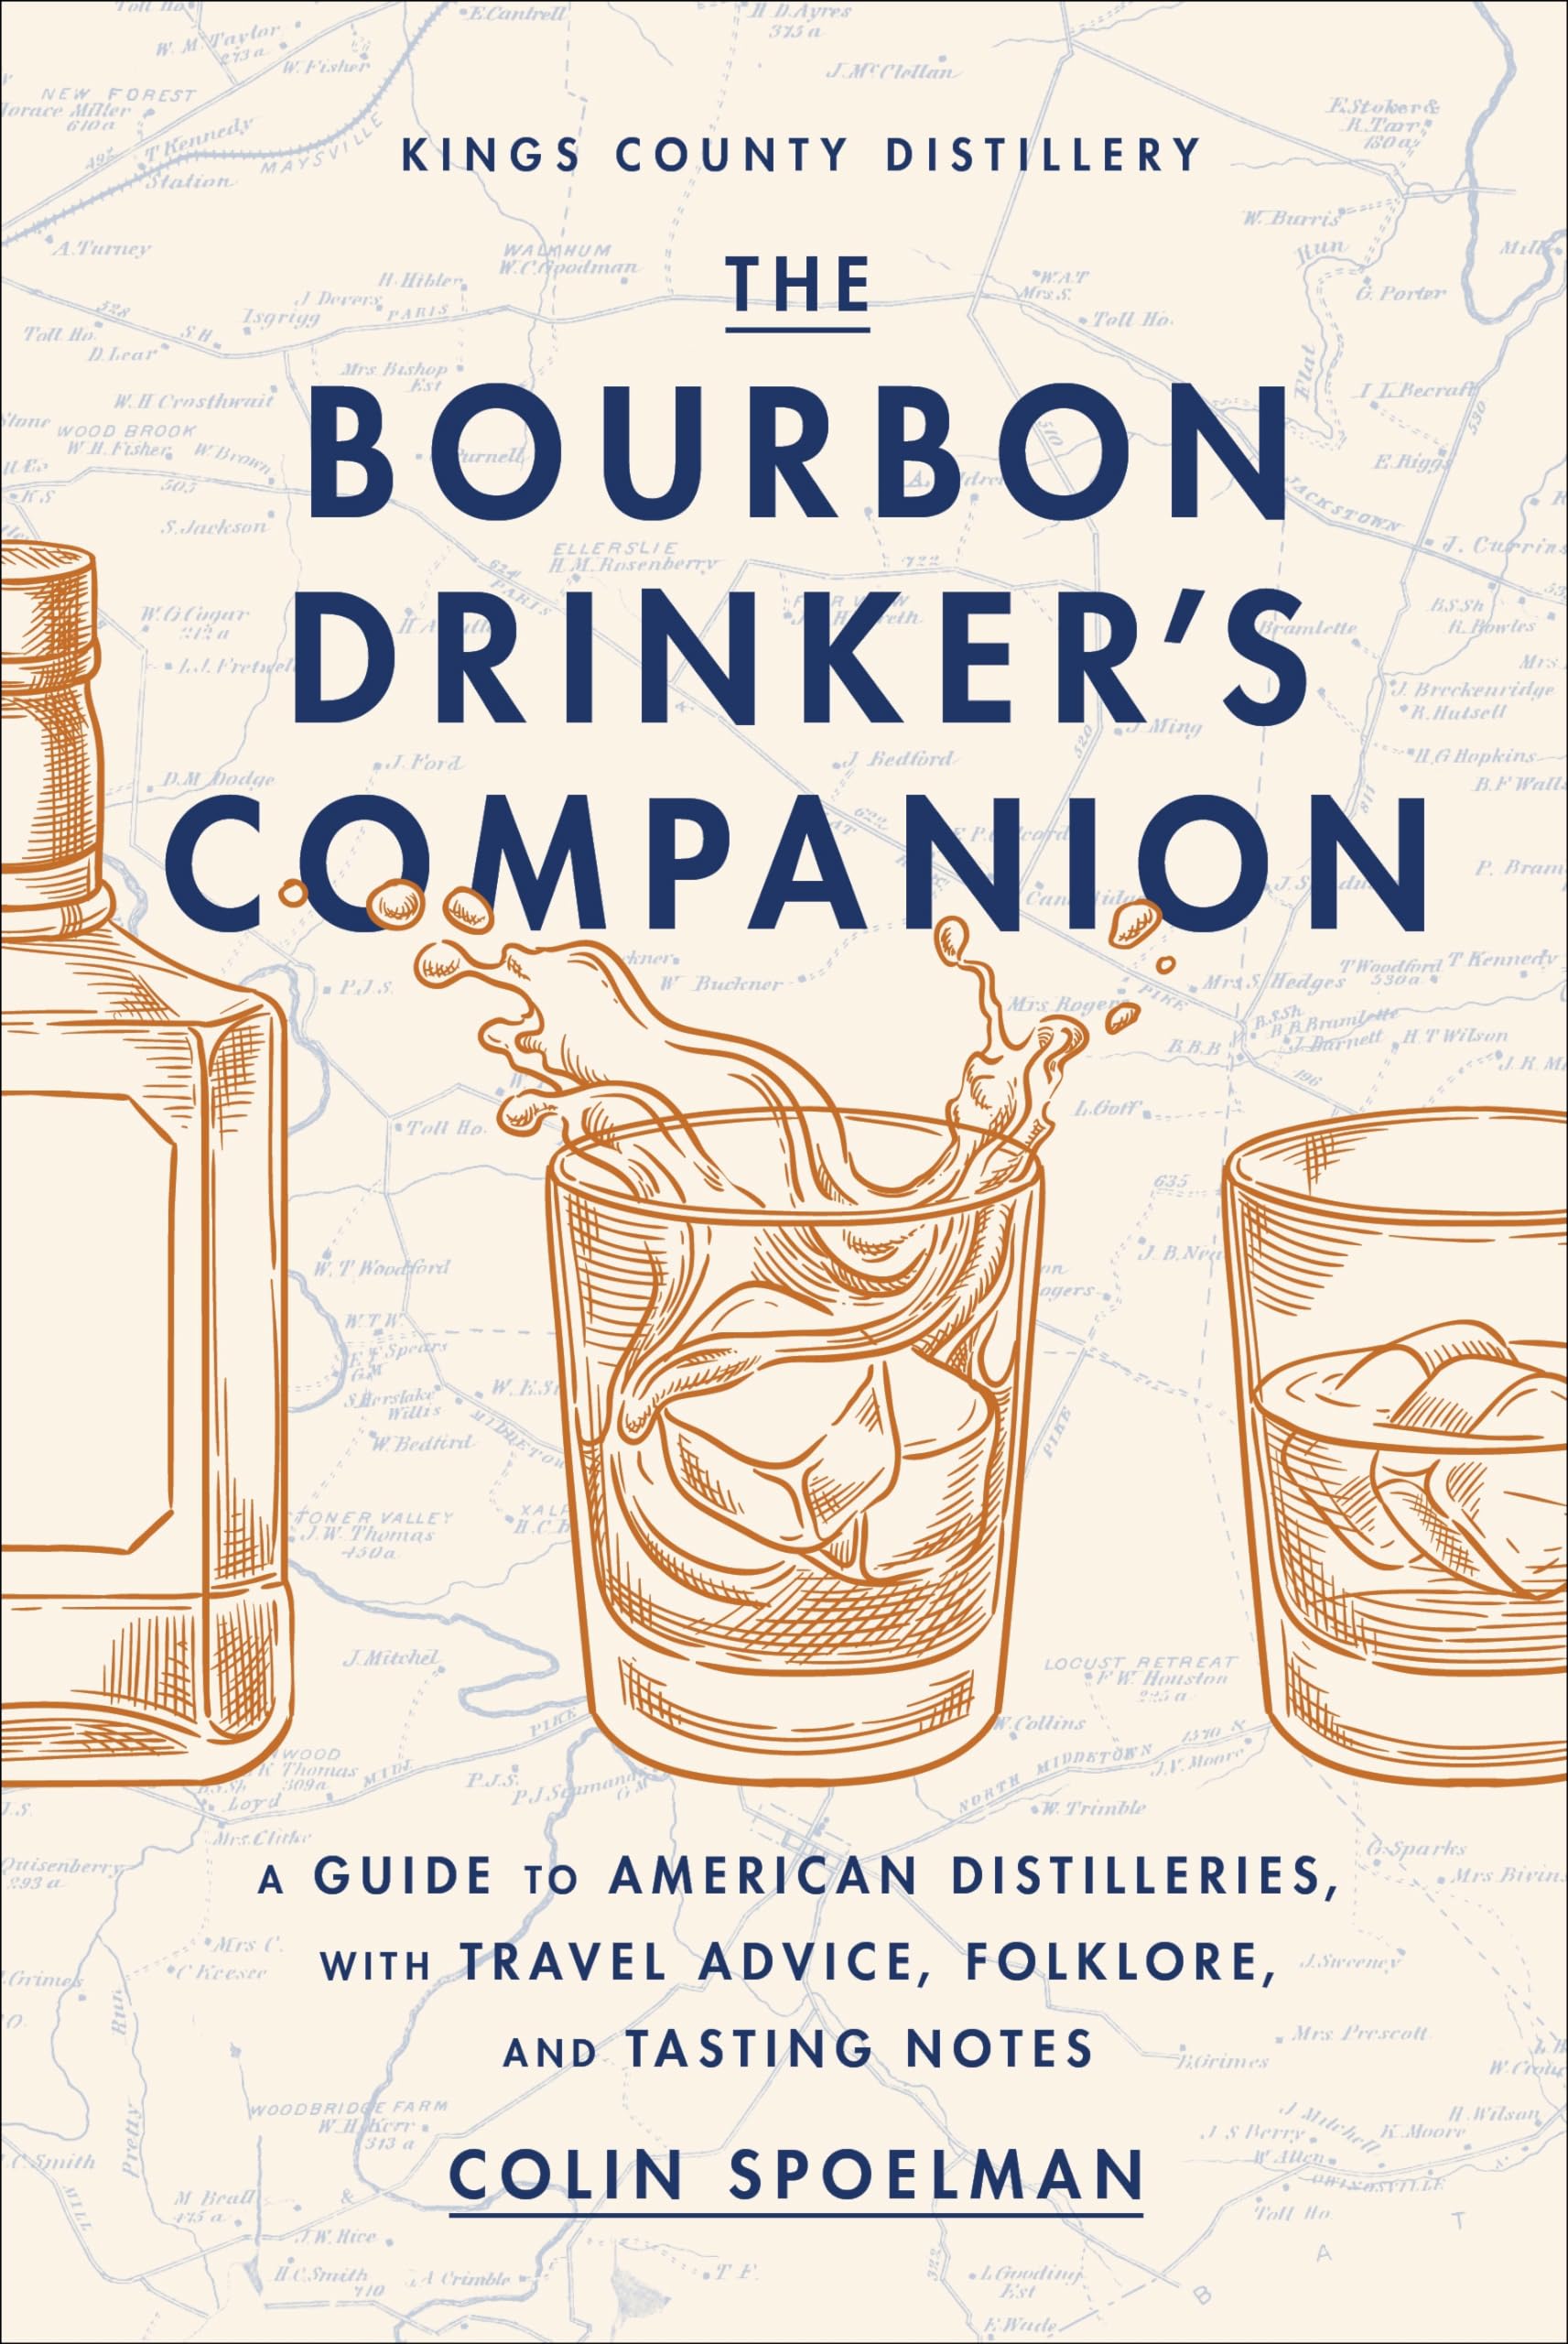 The Bourbon Drinker's Companion: A Guide to American Distilleries, with Travel Advice, Folklore, and Tasting Notes by Spoelman, Colin